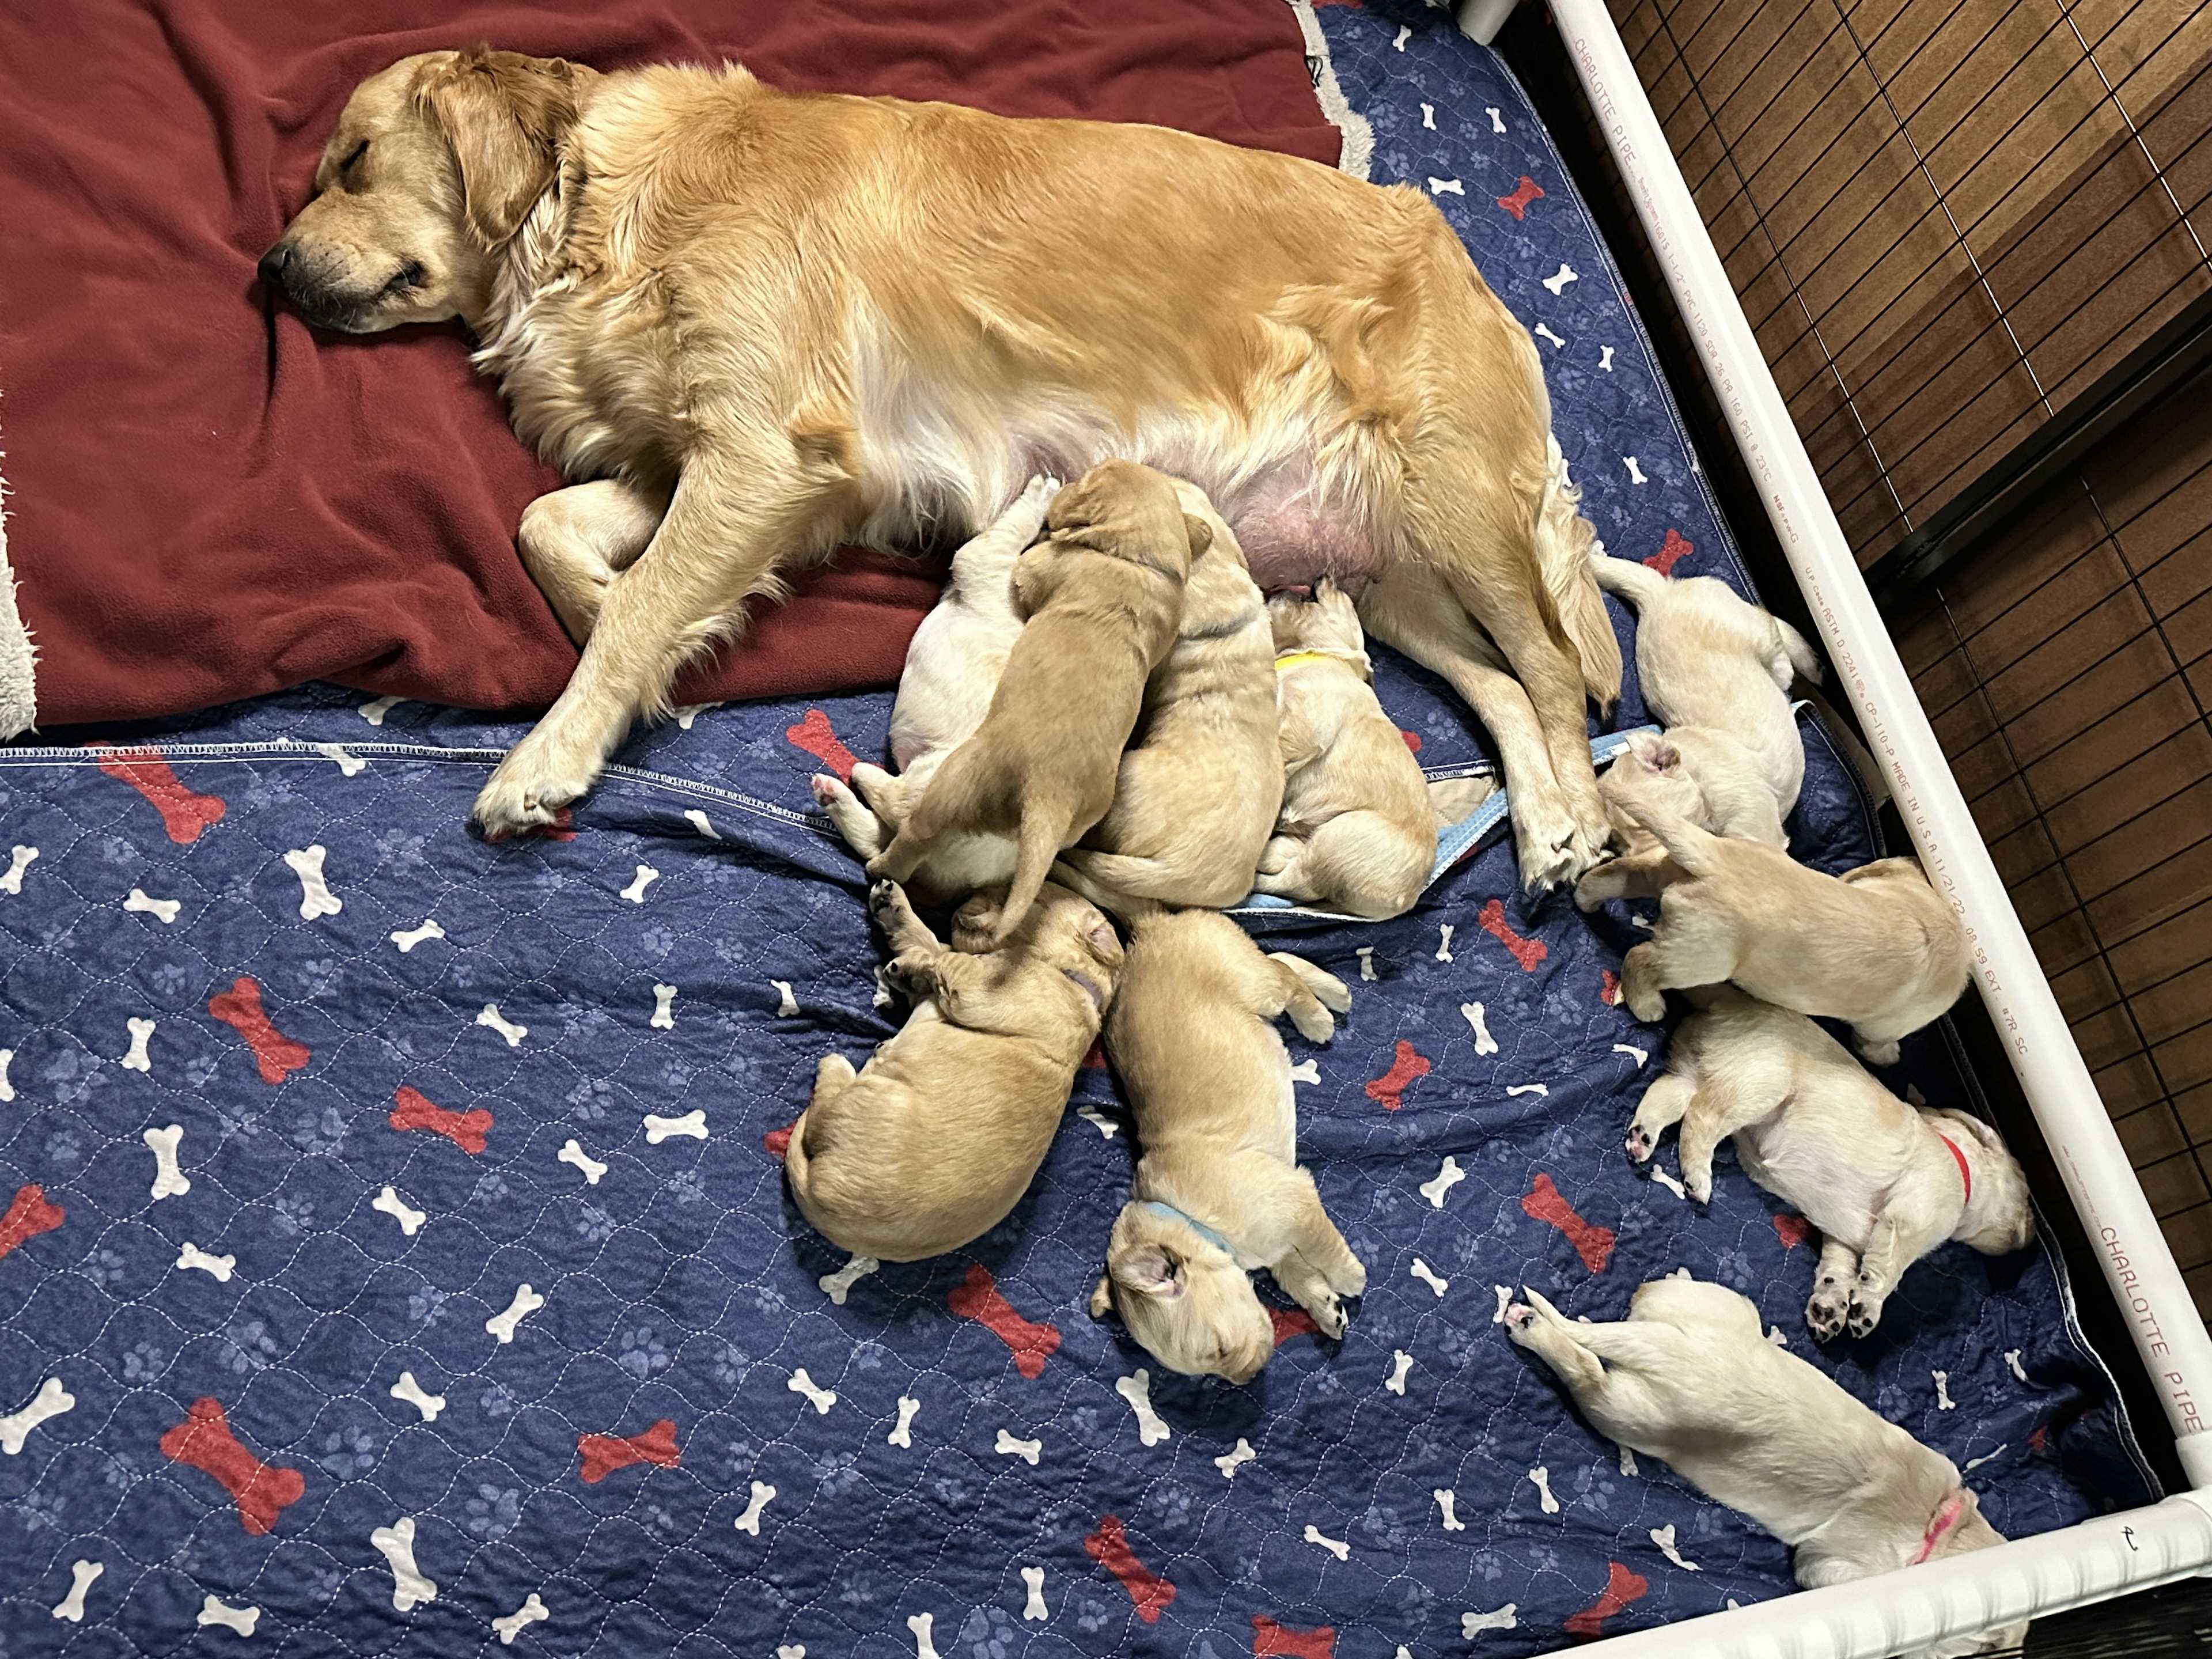 Sophie and Pups at 3 weeks